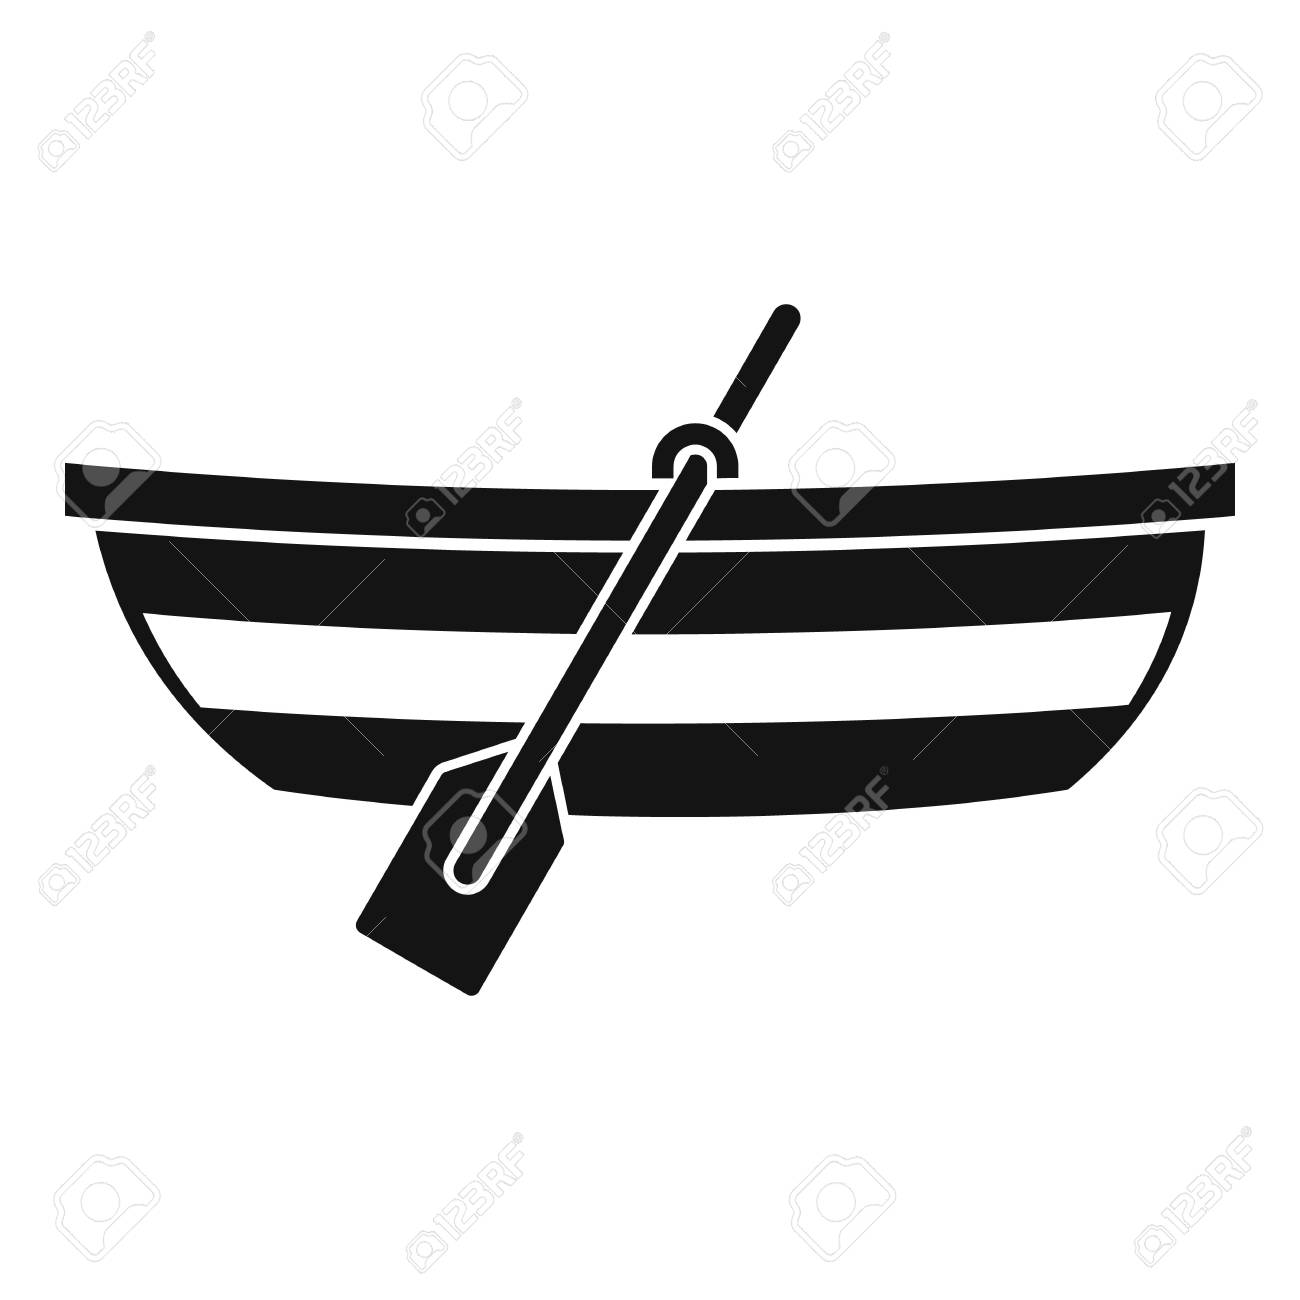 Fishing free on. Boat clipart simple